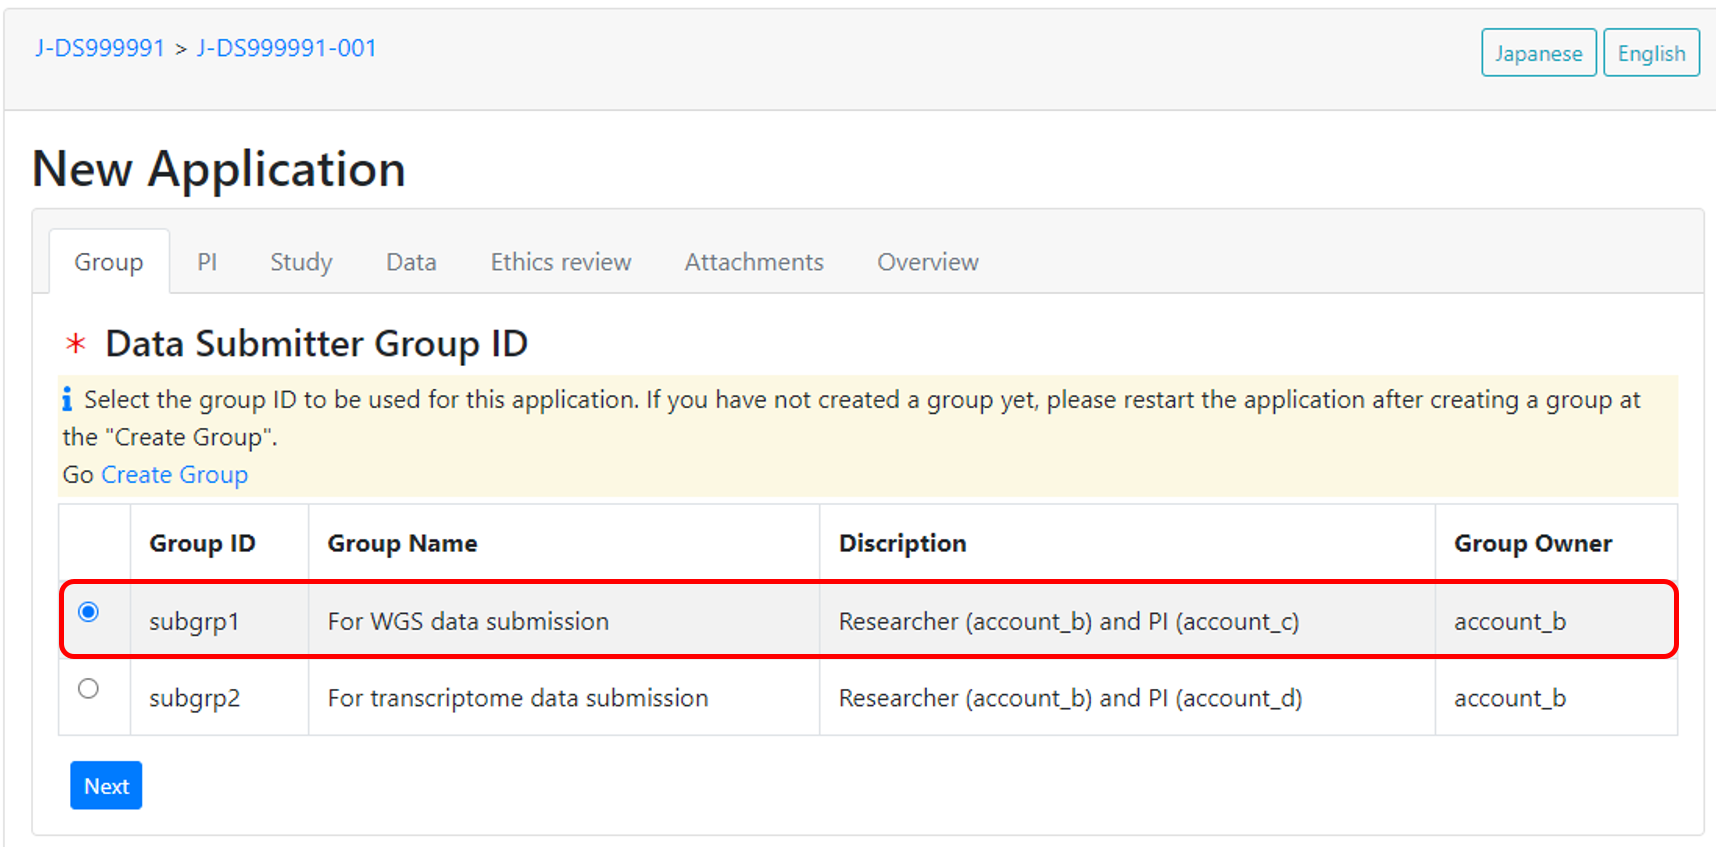 Select the data submitter group